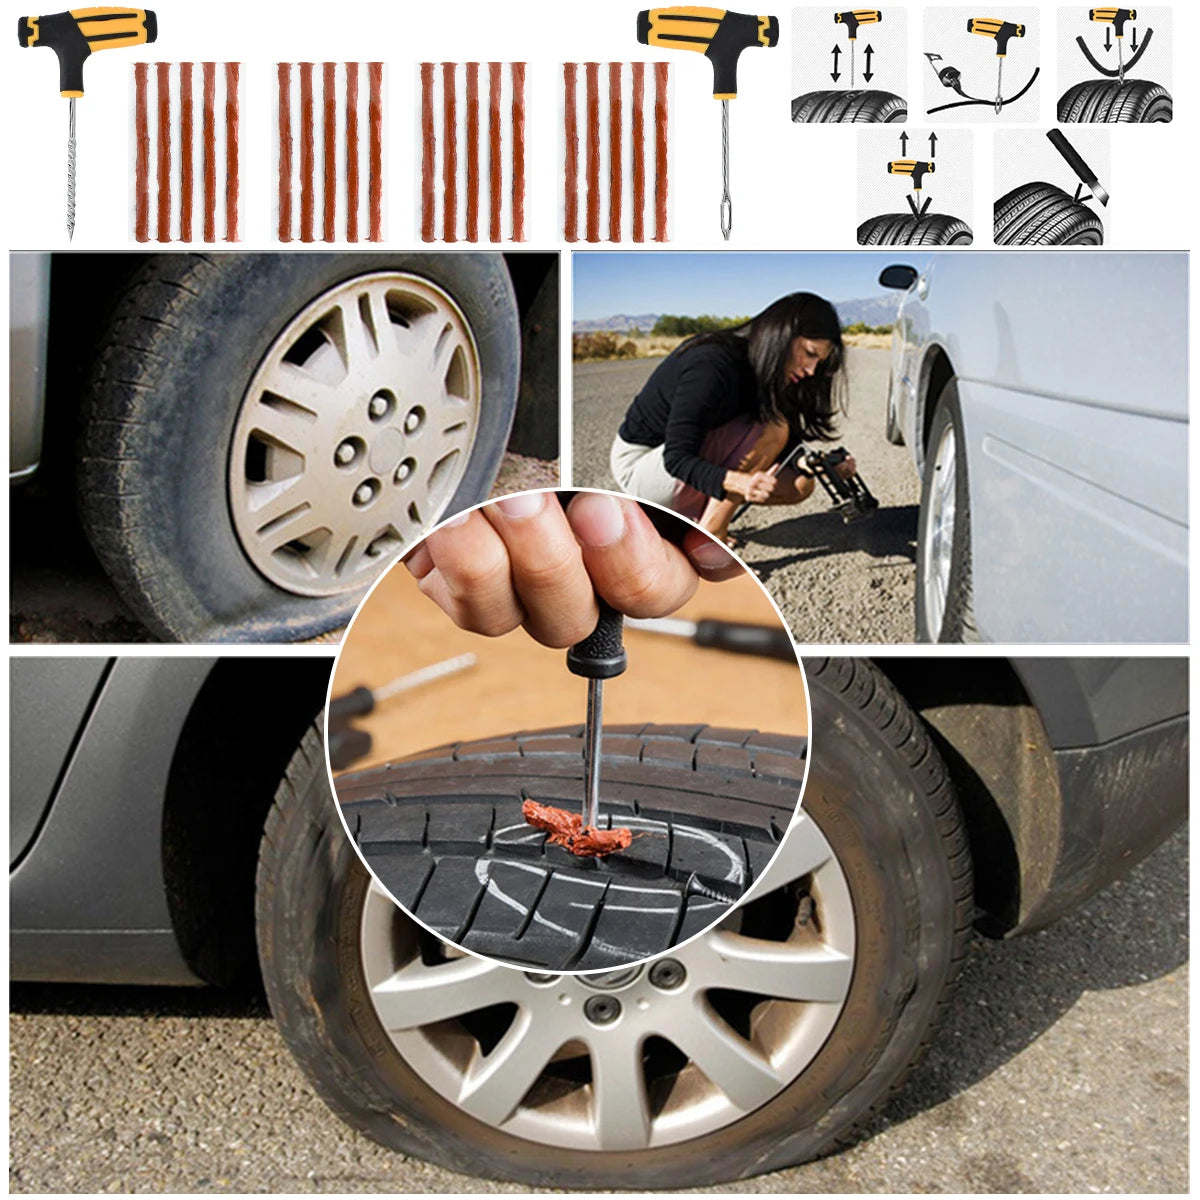 4Pcs Rubber Lifting Jack Pad Adapter Tool Chassis Tire Repair Tool Kit Puncture Plug Set For Tesla Model 3 S X Y Car Accessories